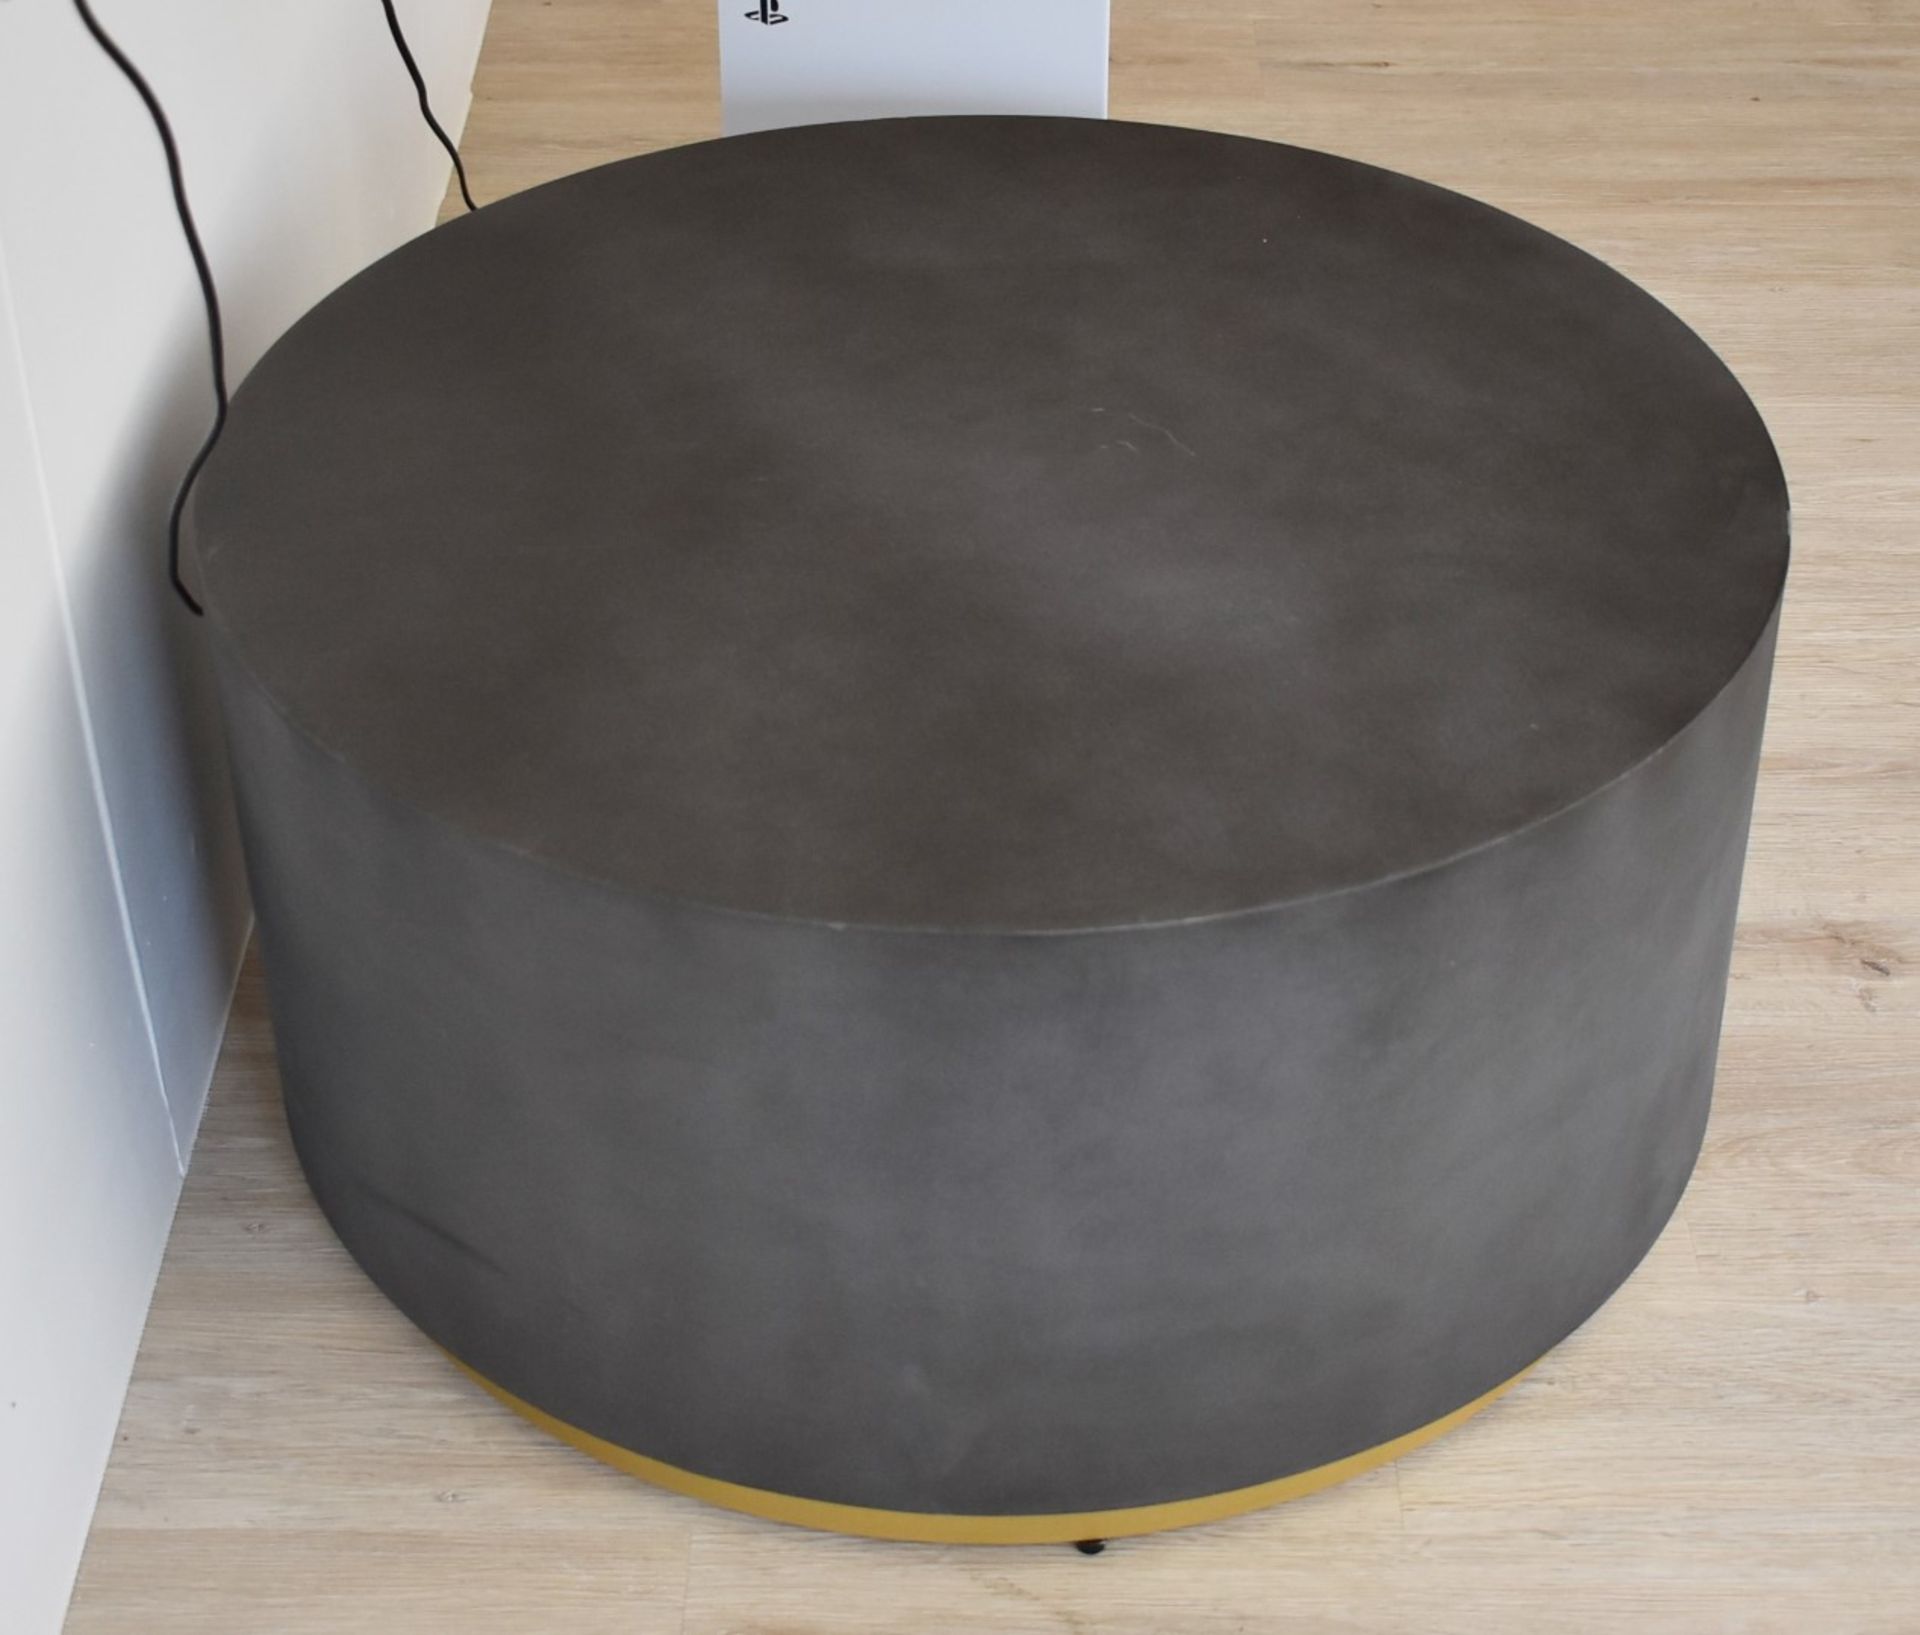 1 x Round Coffee Table With Concrete Effect Finish and Gold Base - RRP £455 - NO VAT ON THE HAMMER! - Image 3 of 7